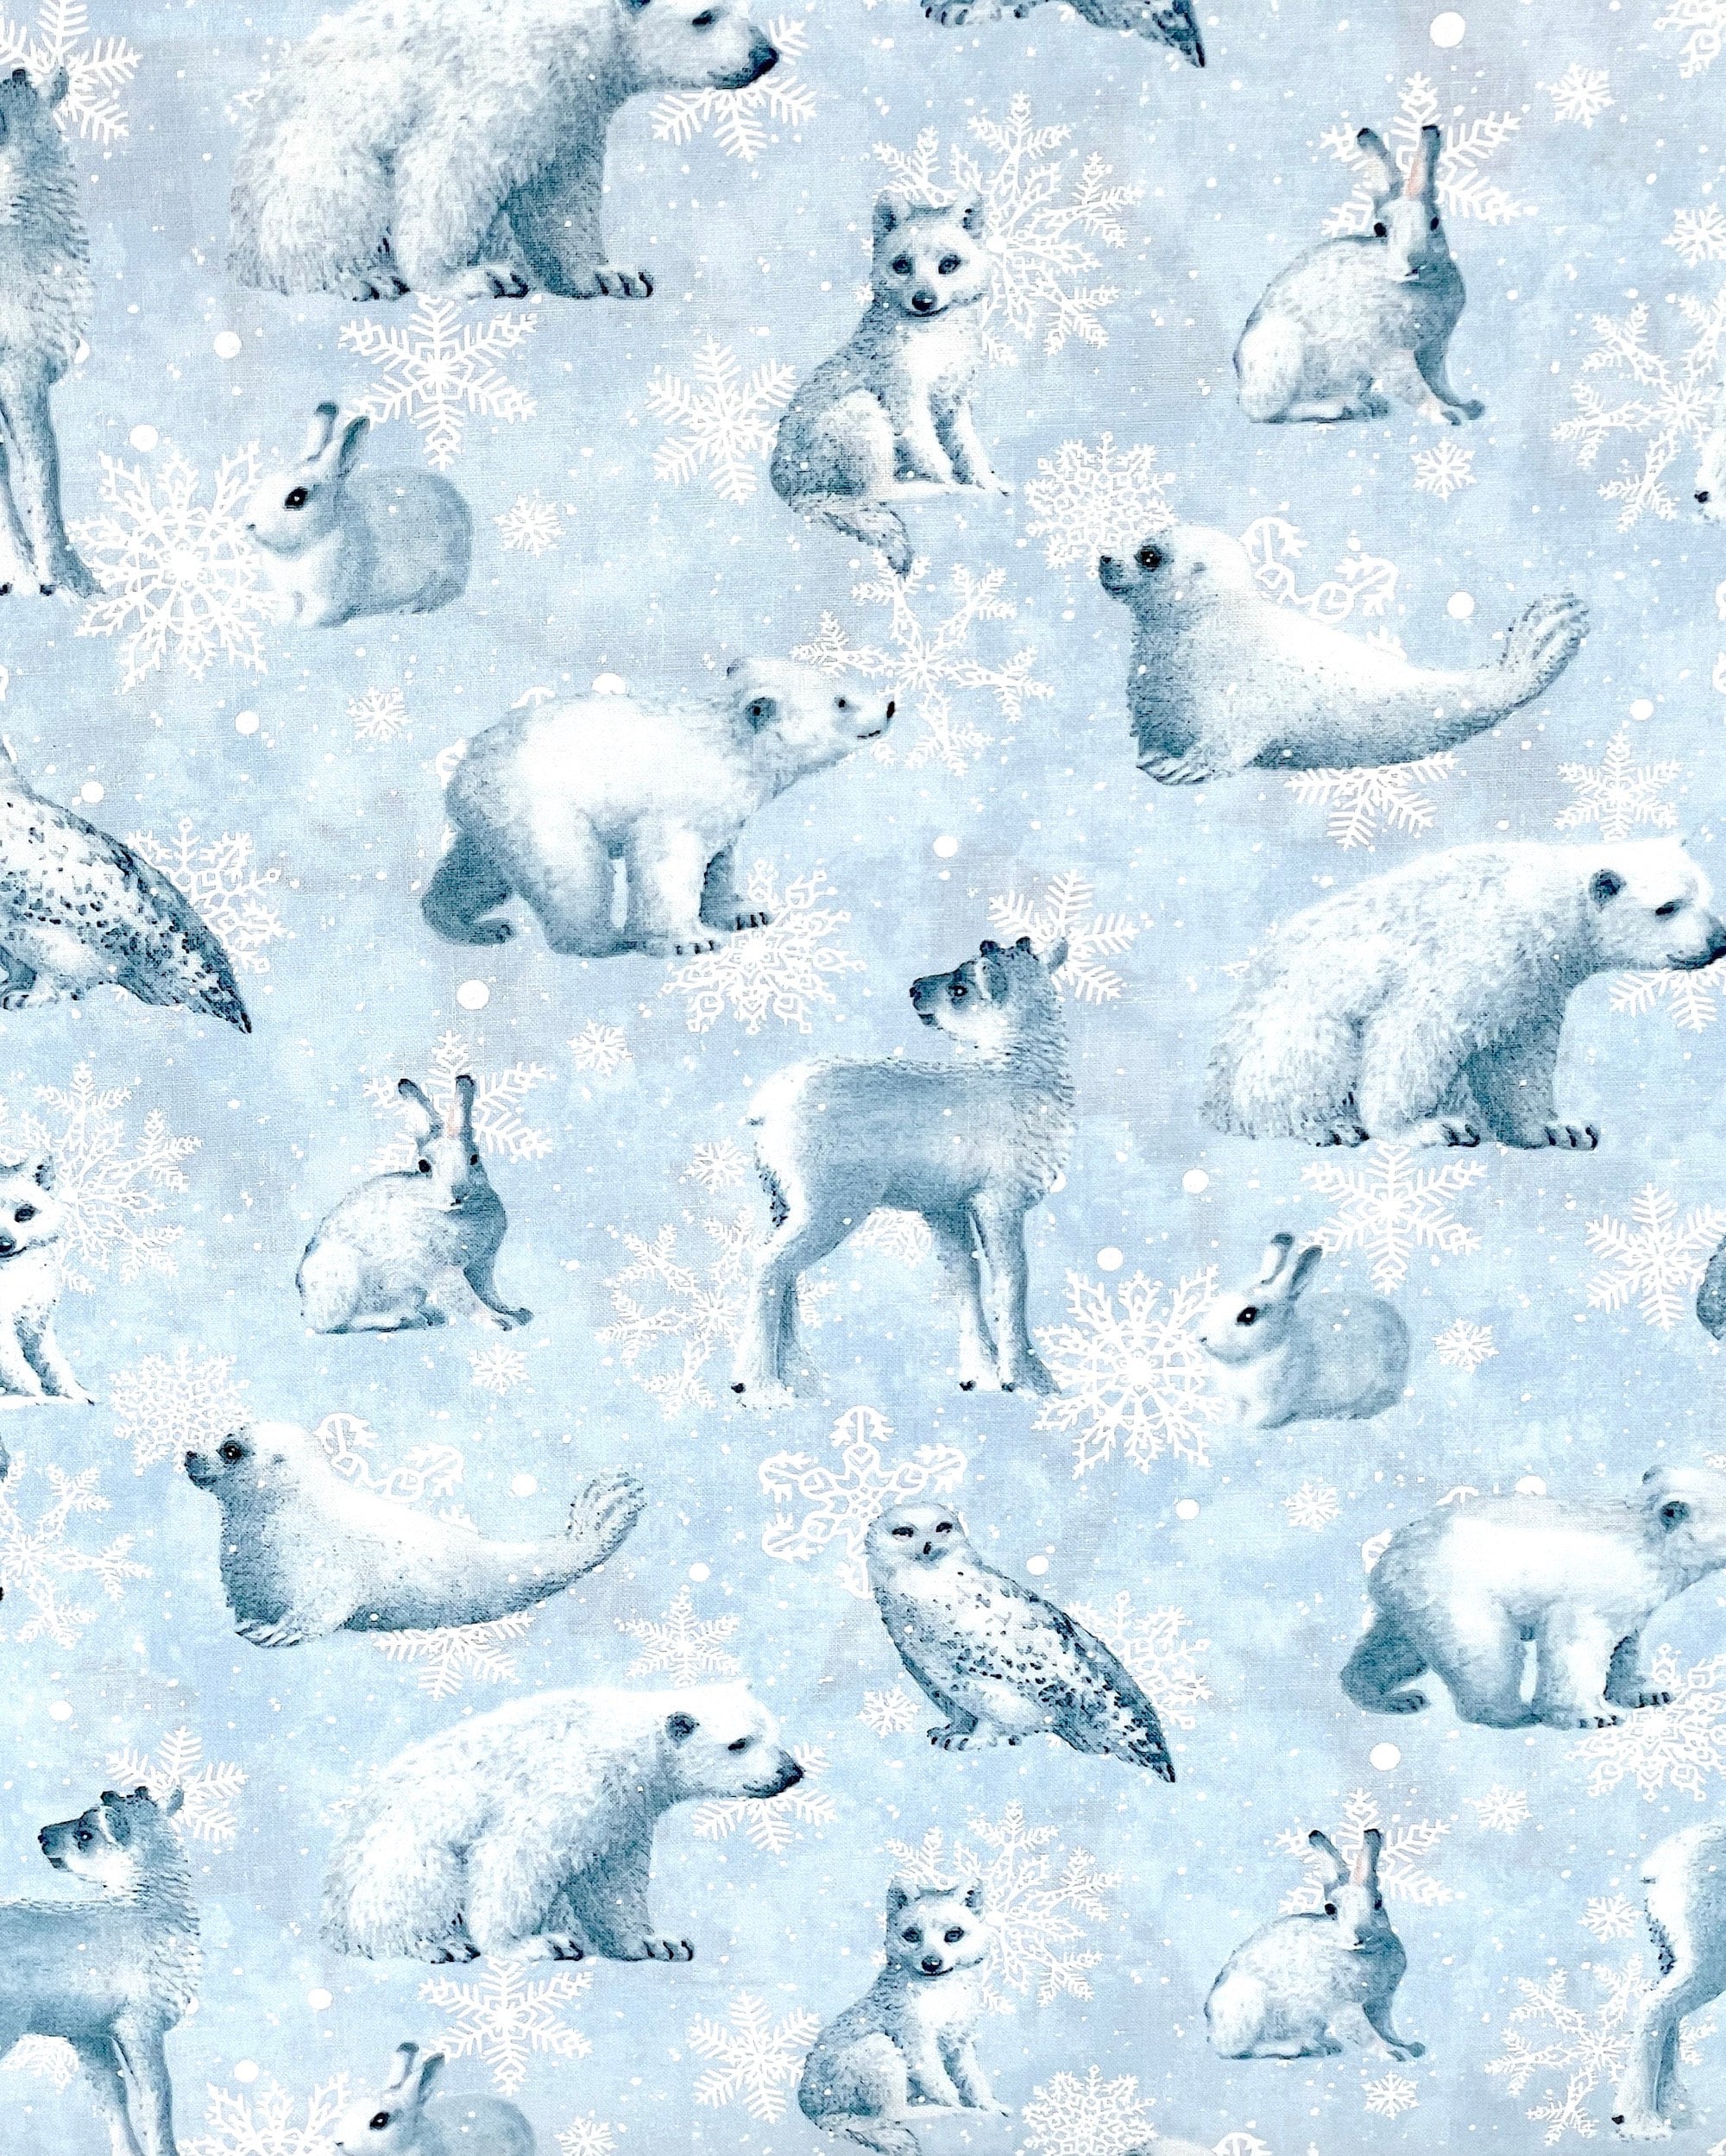 This light blue fabric is covered with bears, bunnies, seals, fox and snowflakes.